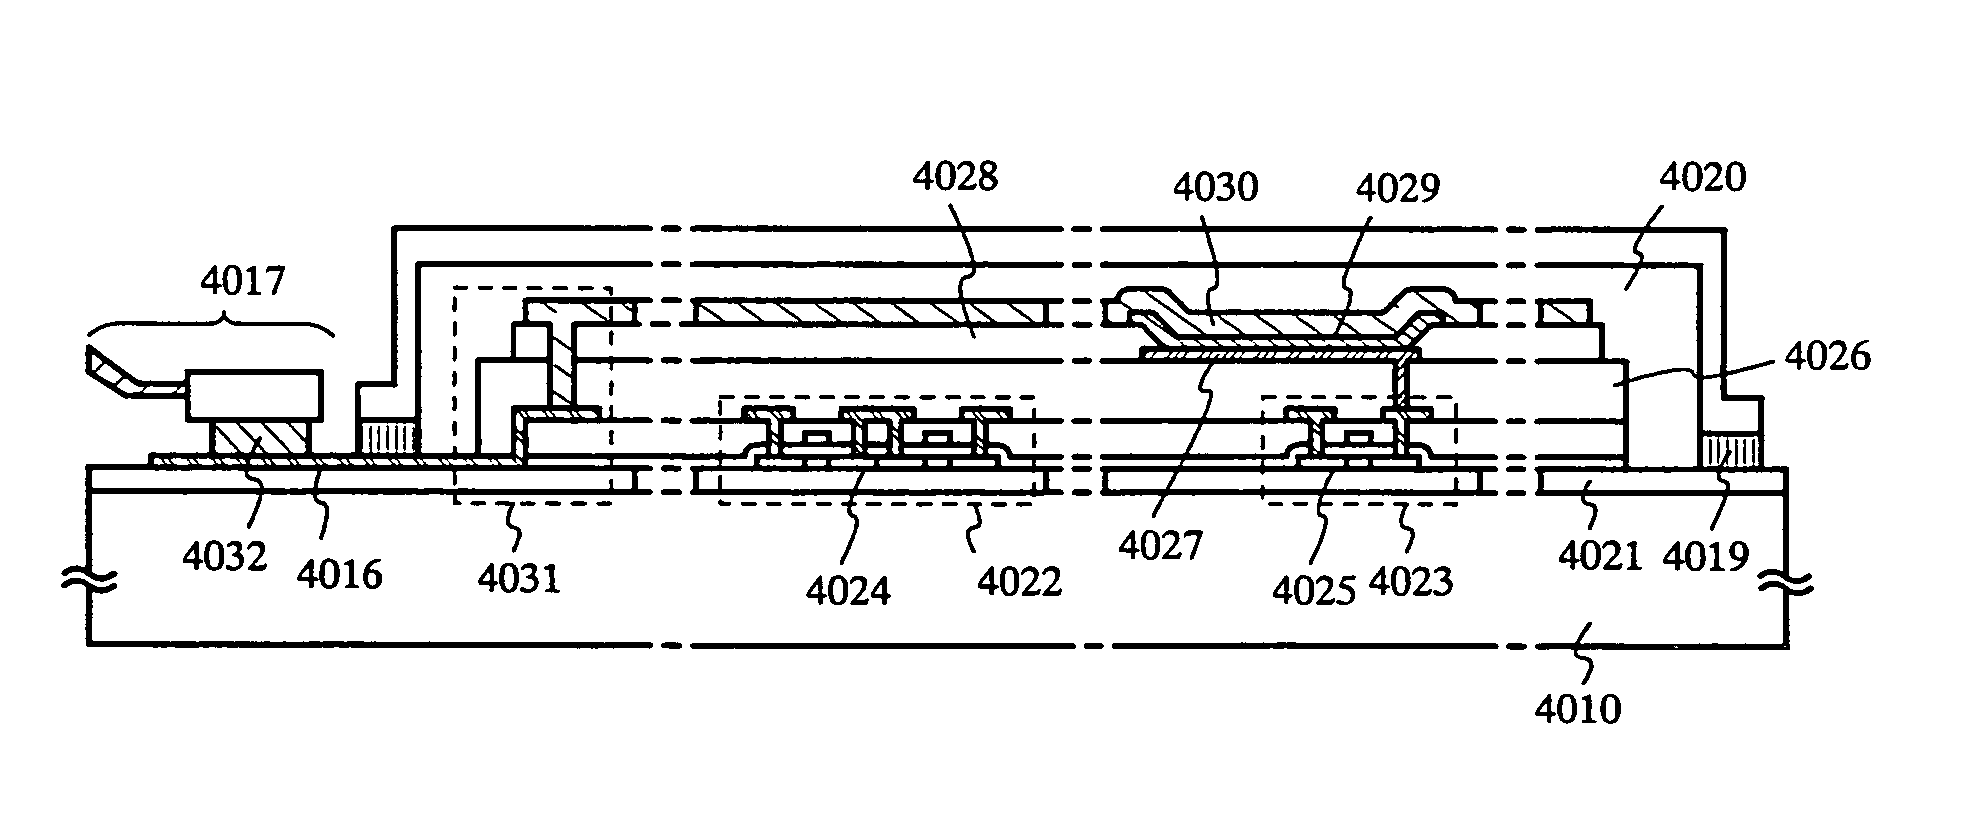 Semiconductor device having El layer and sealing material